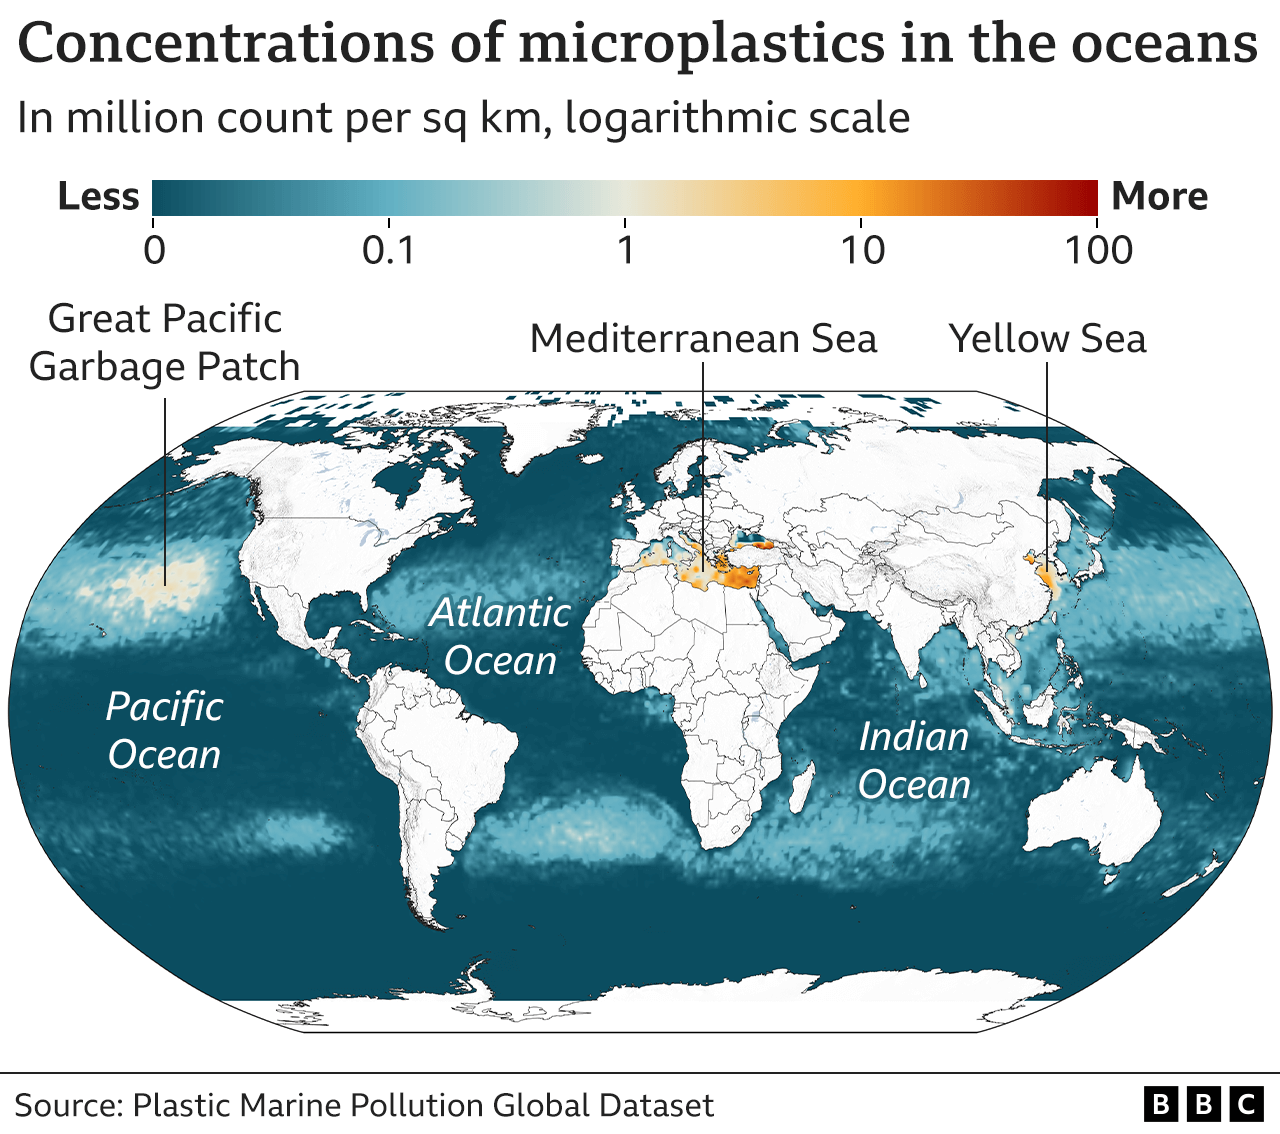 Map showing concentrations of microplastics in the oceans, with ther Mediterranean Sea, the Yellow sea and the Pacific Ocean highlighted as having particularly high concentrations